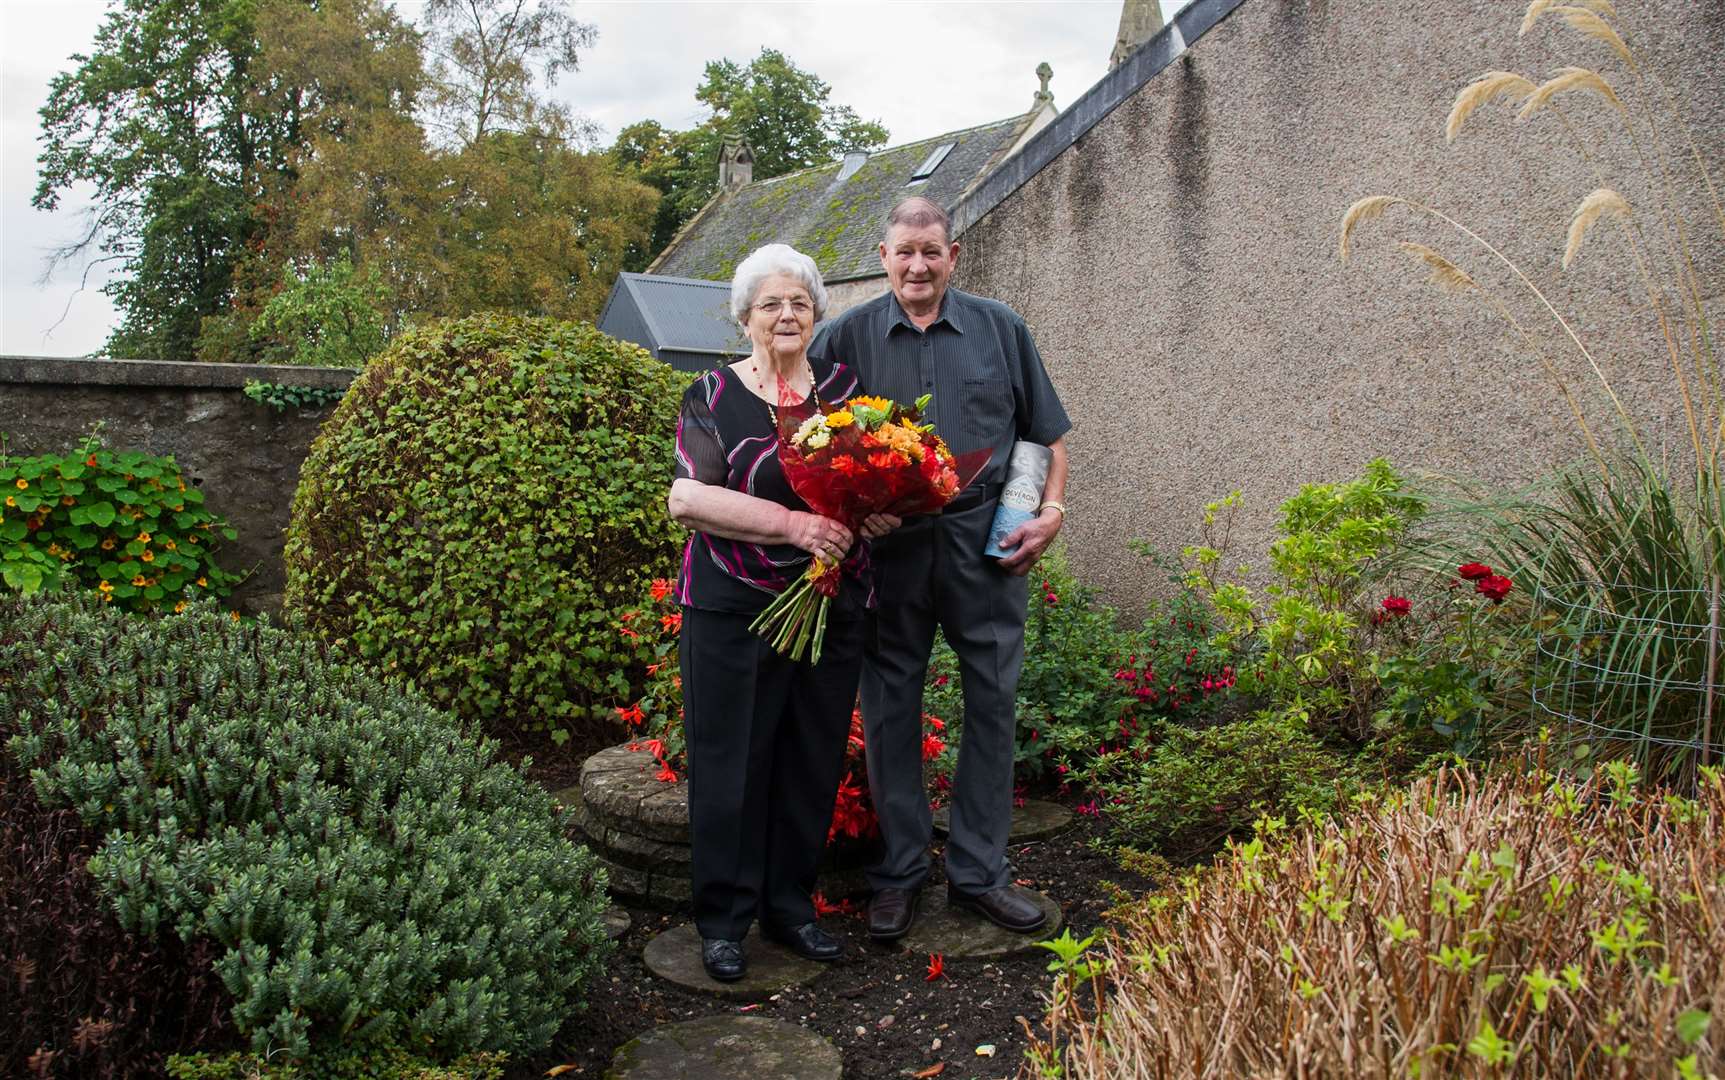 Alistair and Doreen Ingram on the diamond anniversary. Picture: Becky Saunderson.